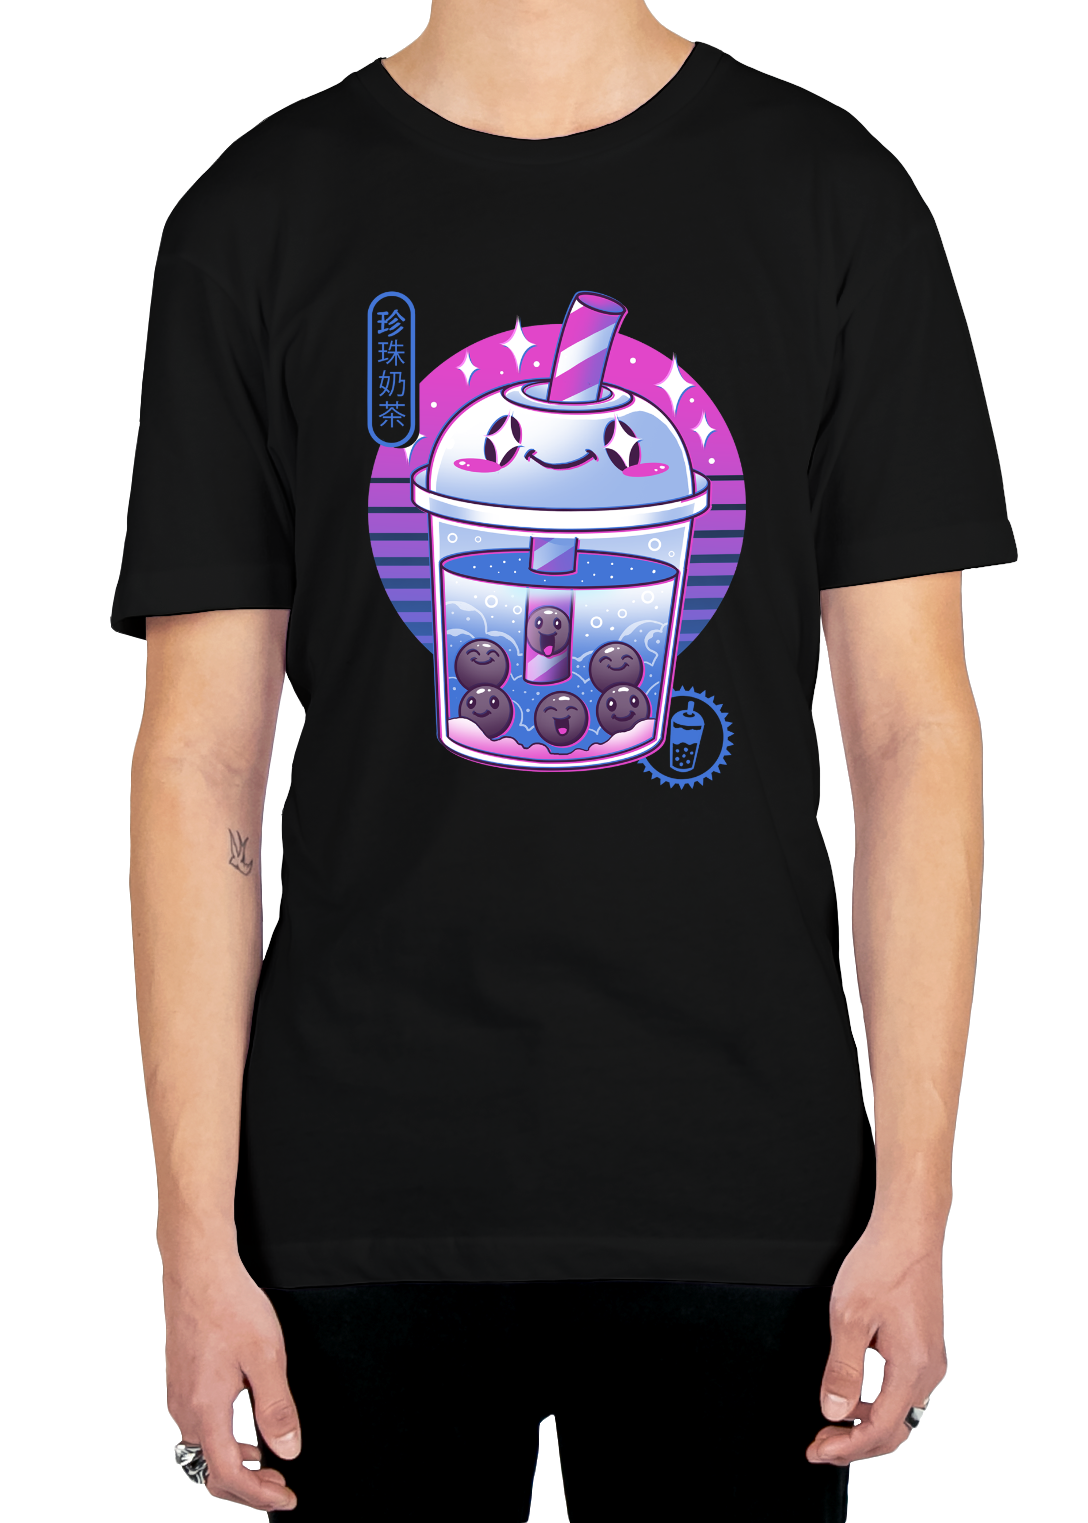 It's Boba Time Tee